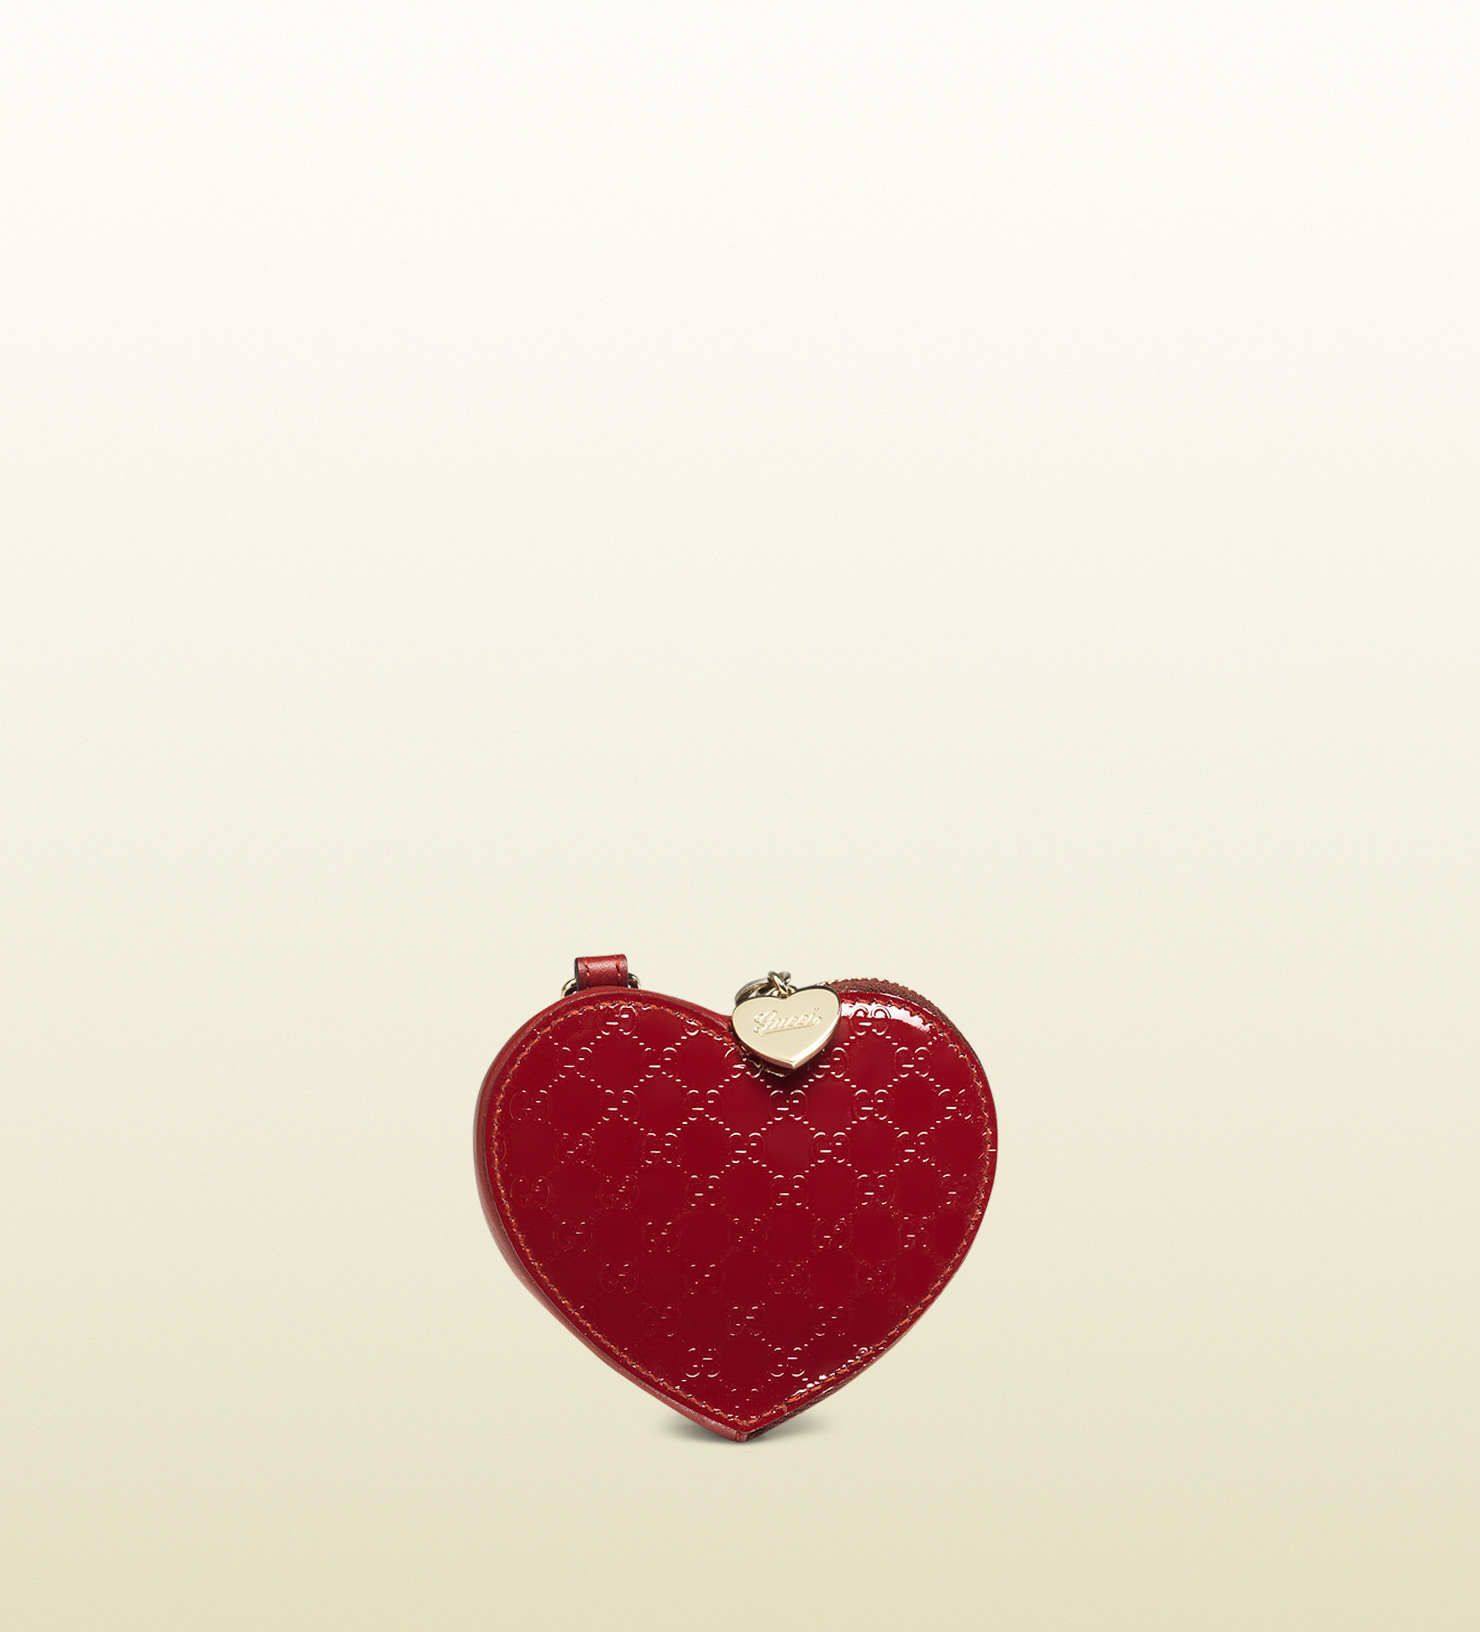 Gucci Microguccissima Leather Coin Purse in Red - Lyst